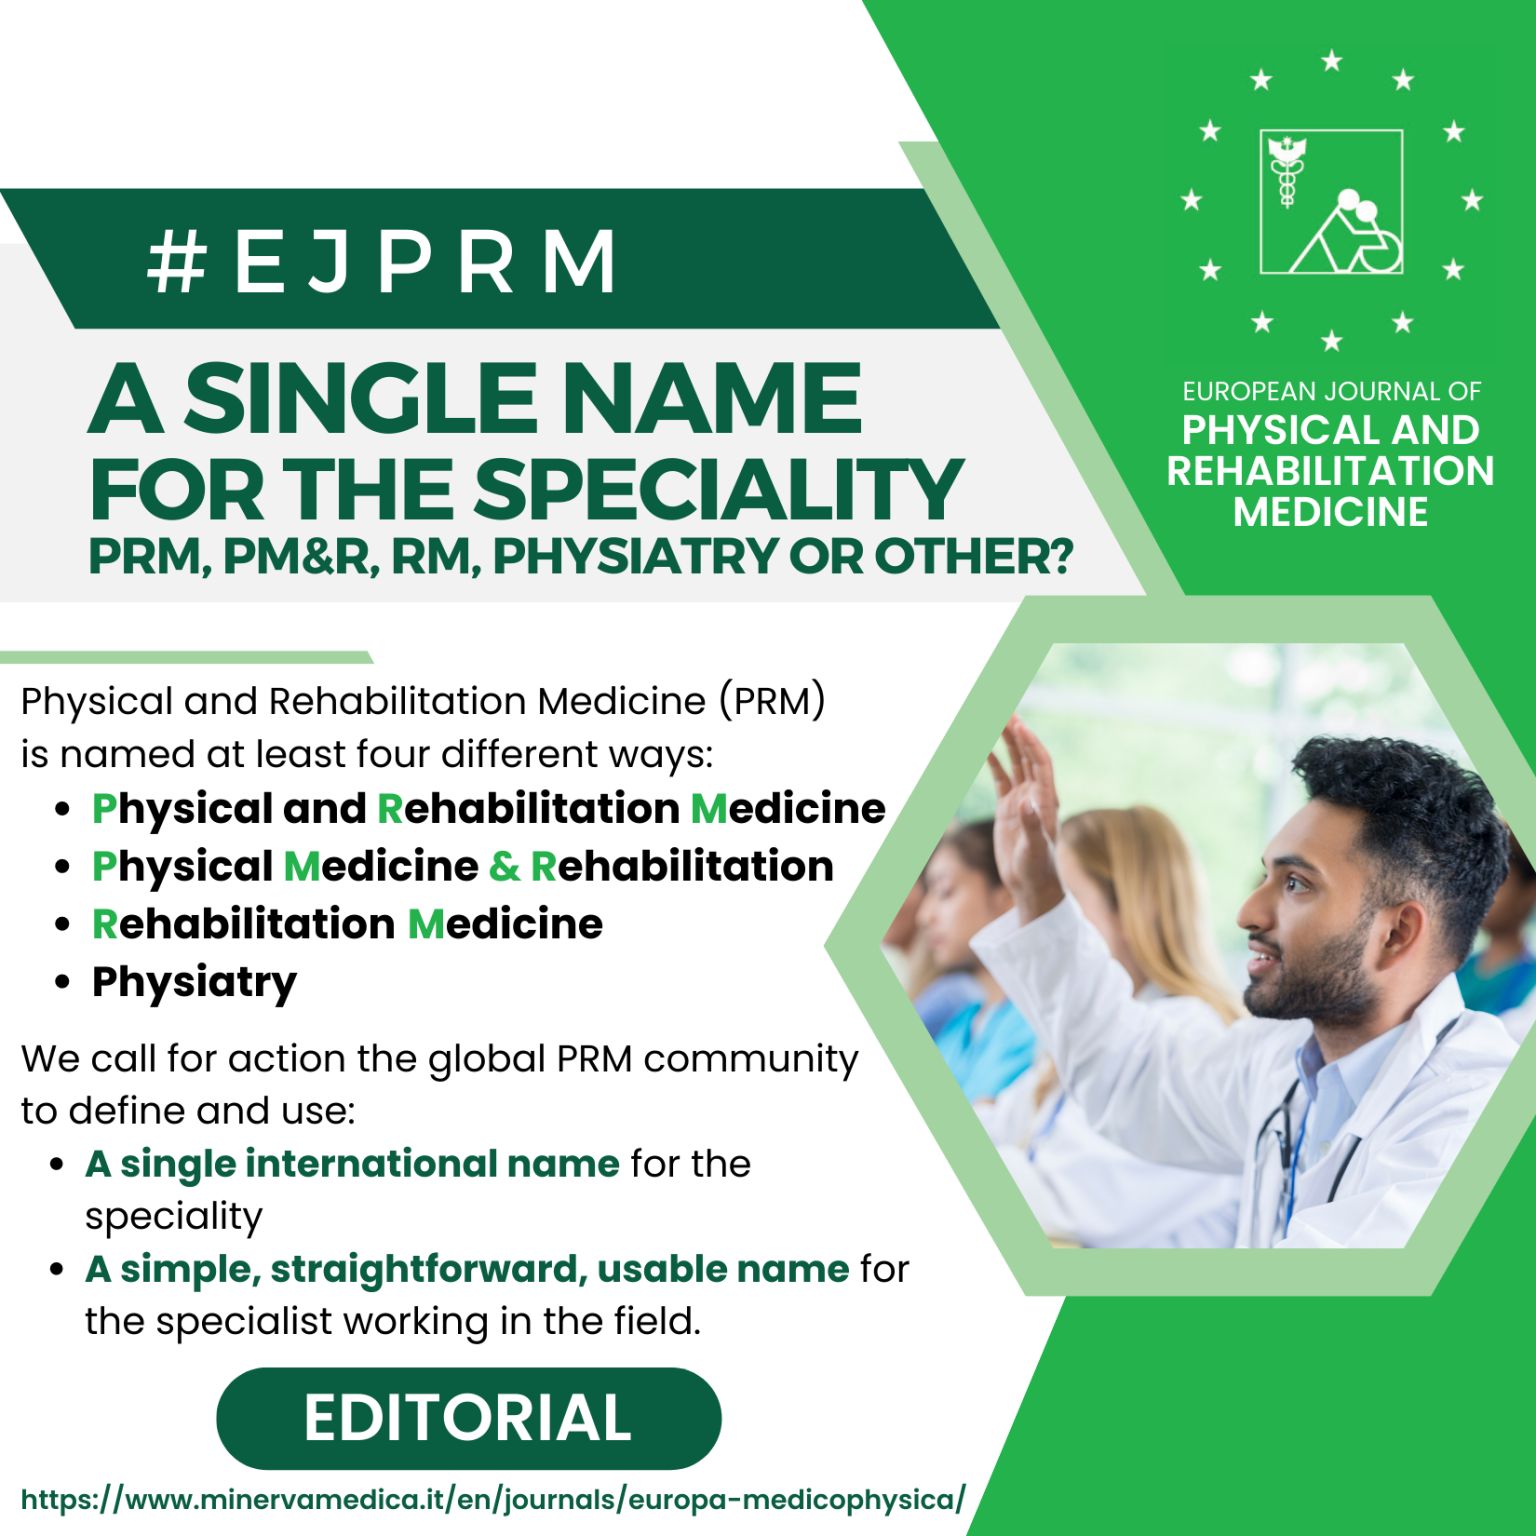 EJPRM Editorial - A call for a single international name for the speciality and the specialist